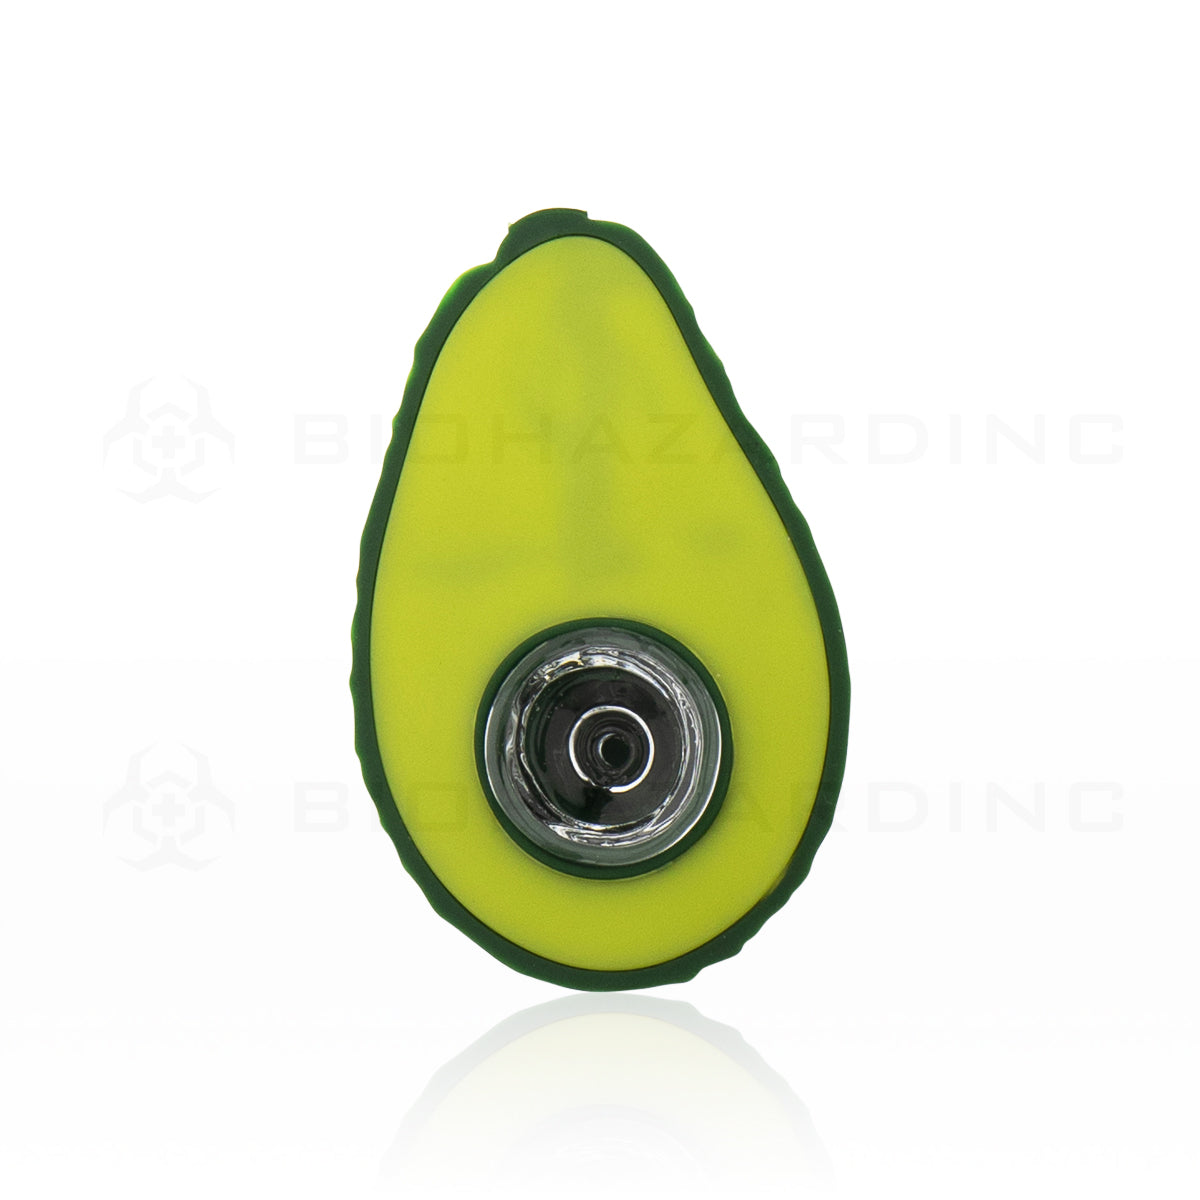 Novelty | Avocado Silicone Hand Pipe w/ Glass Bowl | 3.5" - Glass - 5 Count Novelty Hand Pipe Biohazard Inc   